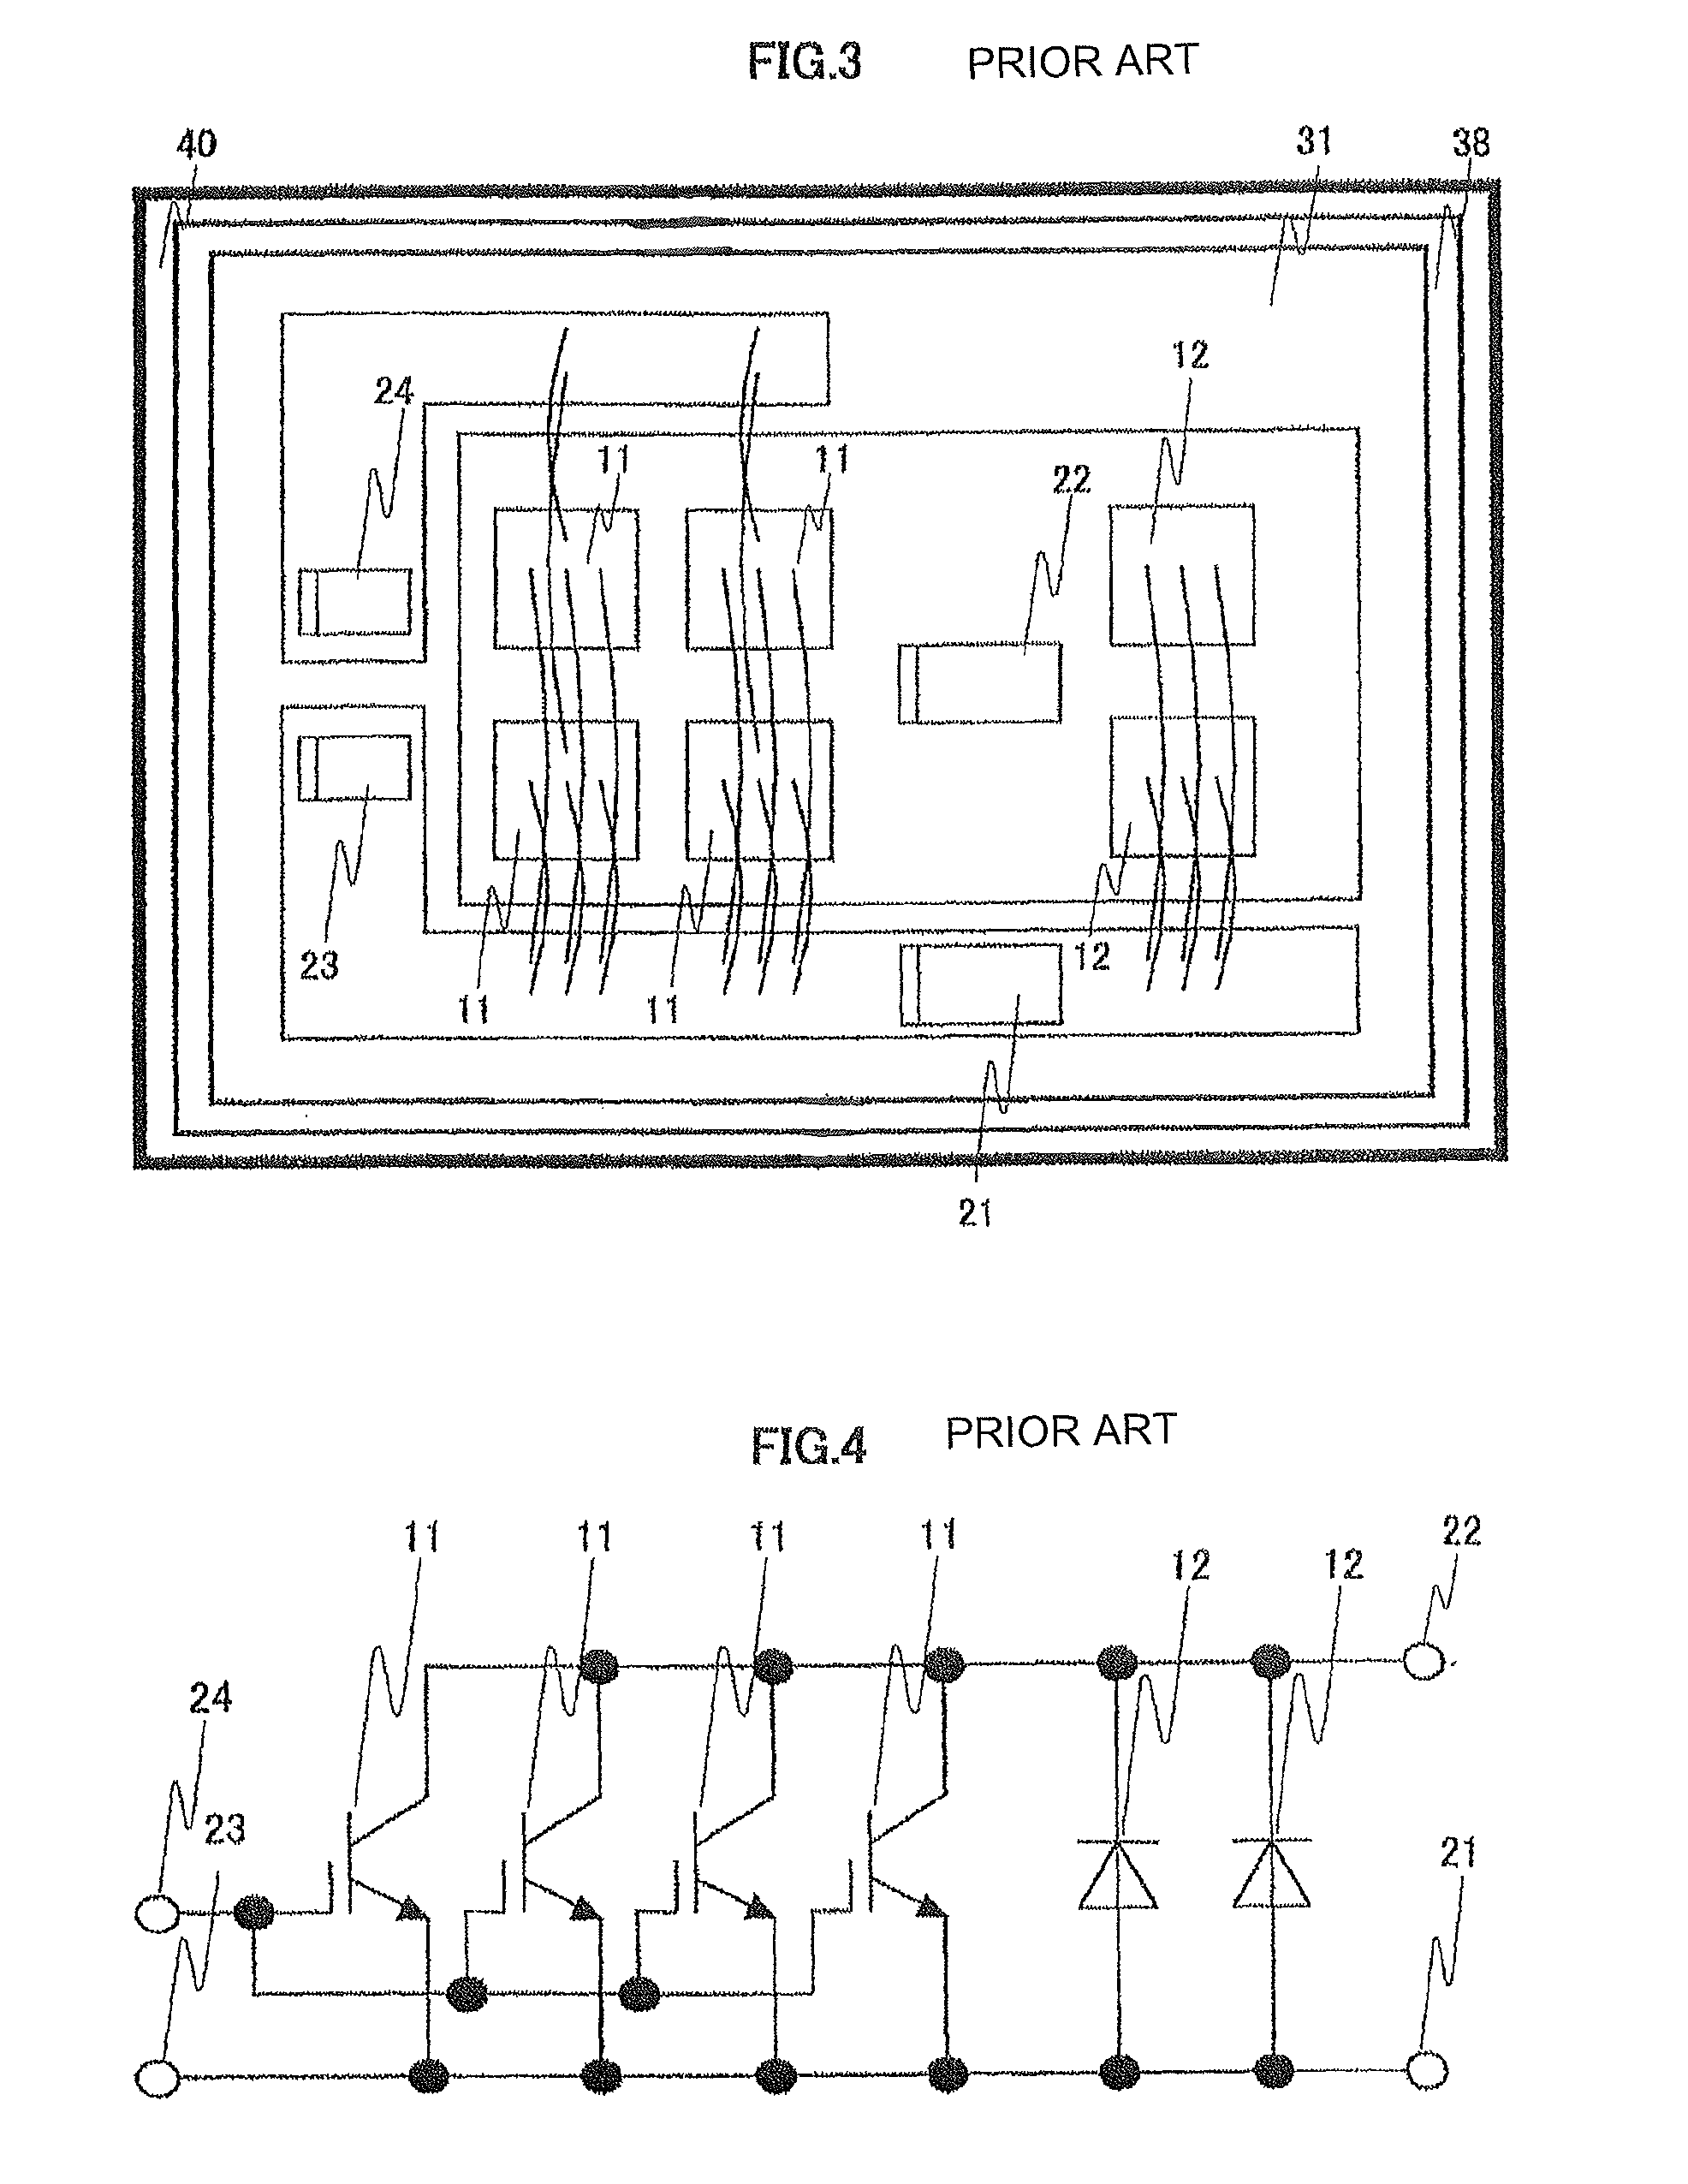 Power semiconductor apparatus having a silicon power semiconductor device and a wide gap semiconductor device